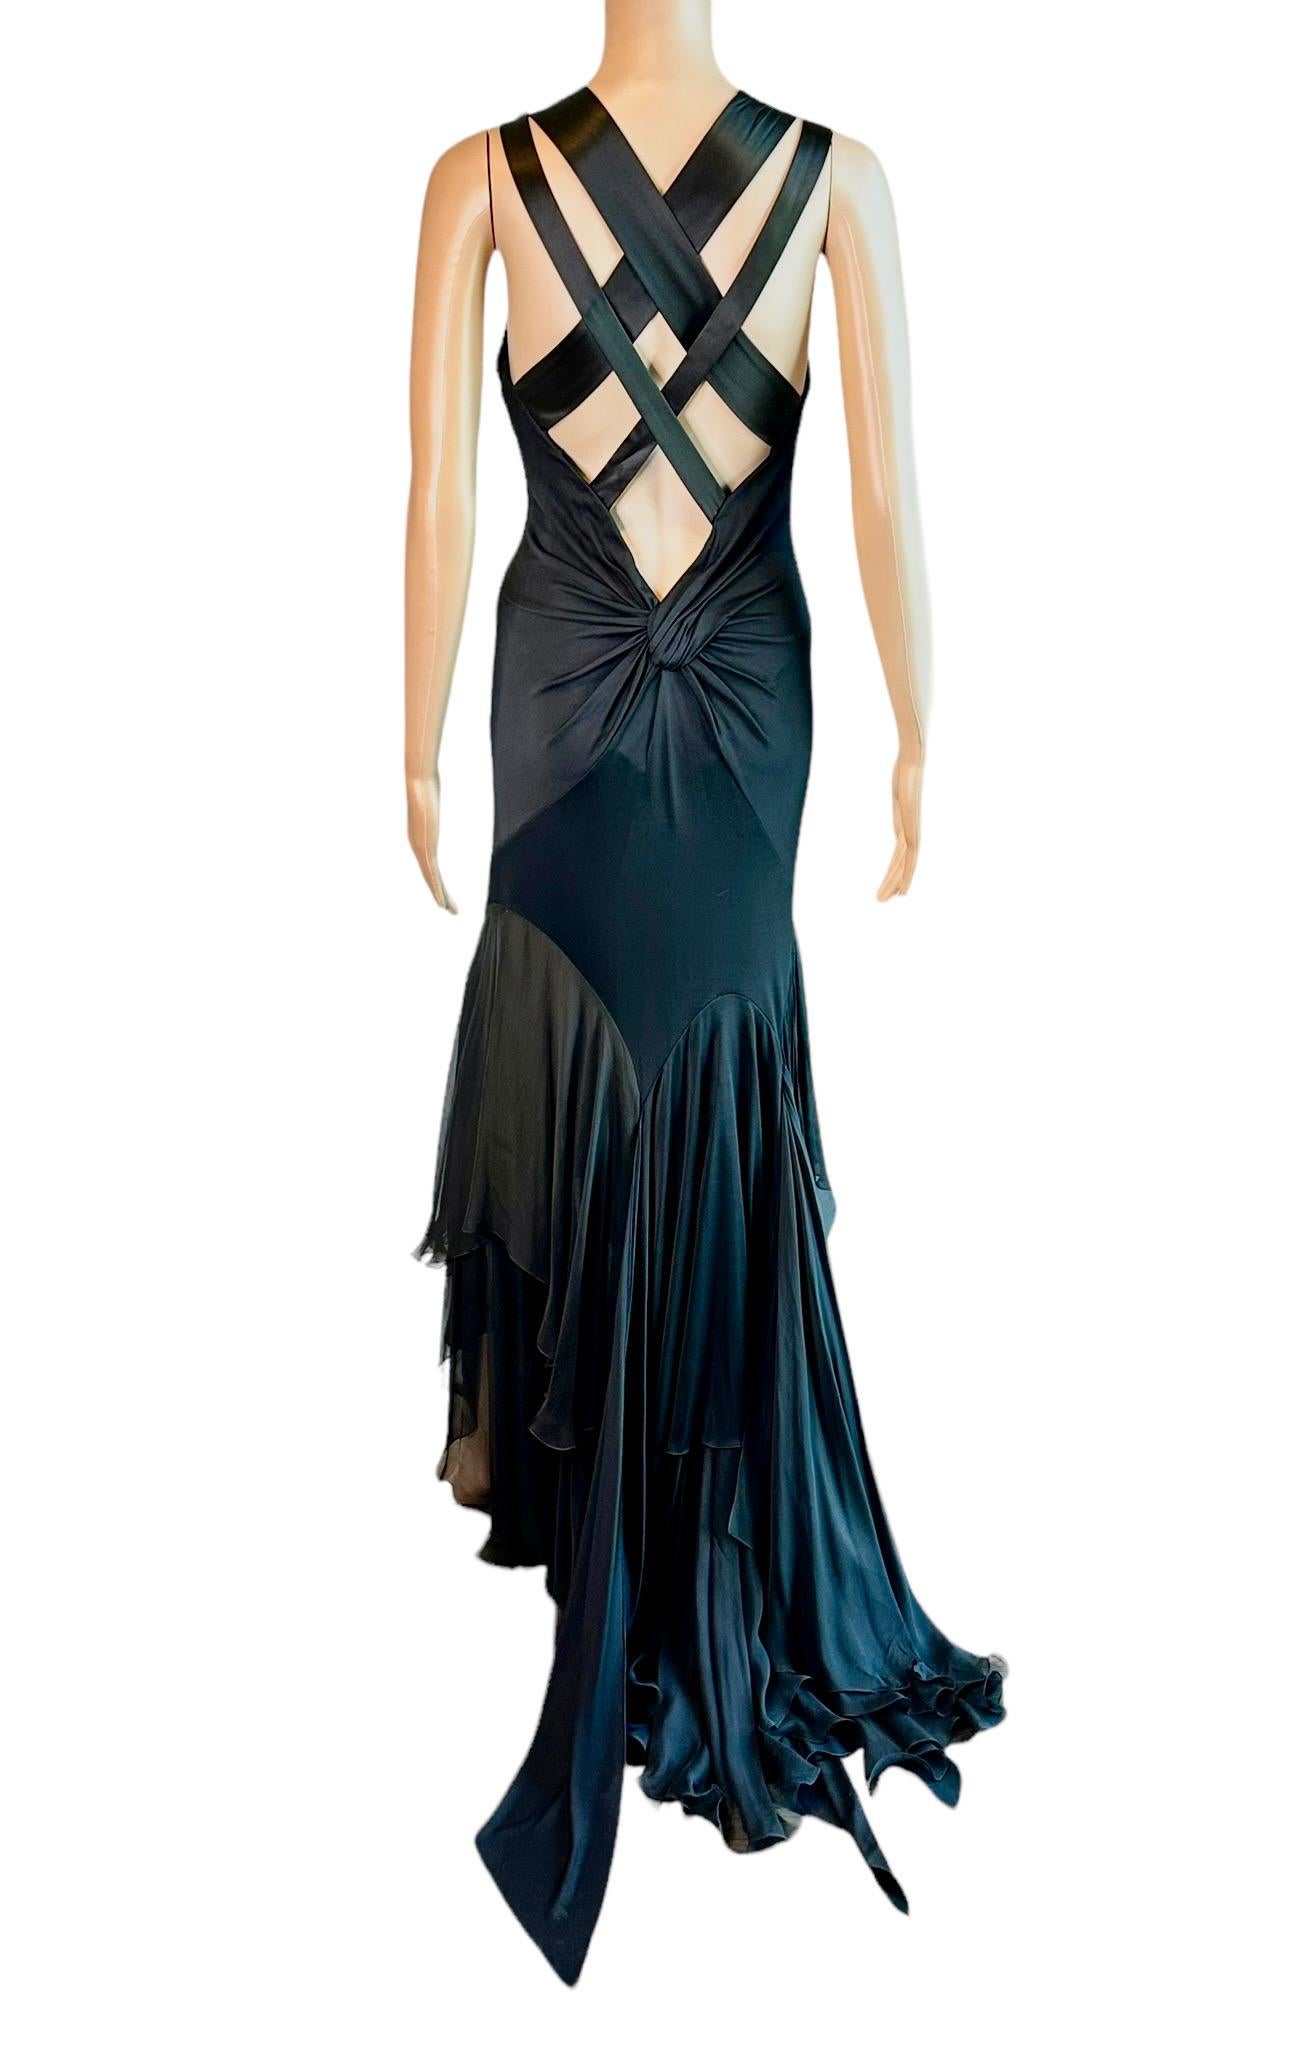 Versace S/S 2004 Plunged Halter Open Back Ruffles Black Evening Dress Gown  For Sale 3